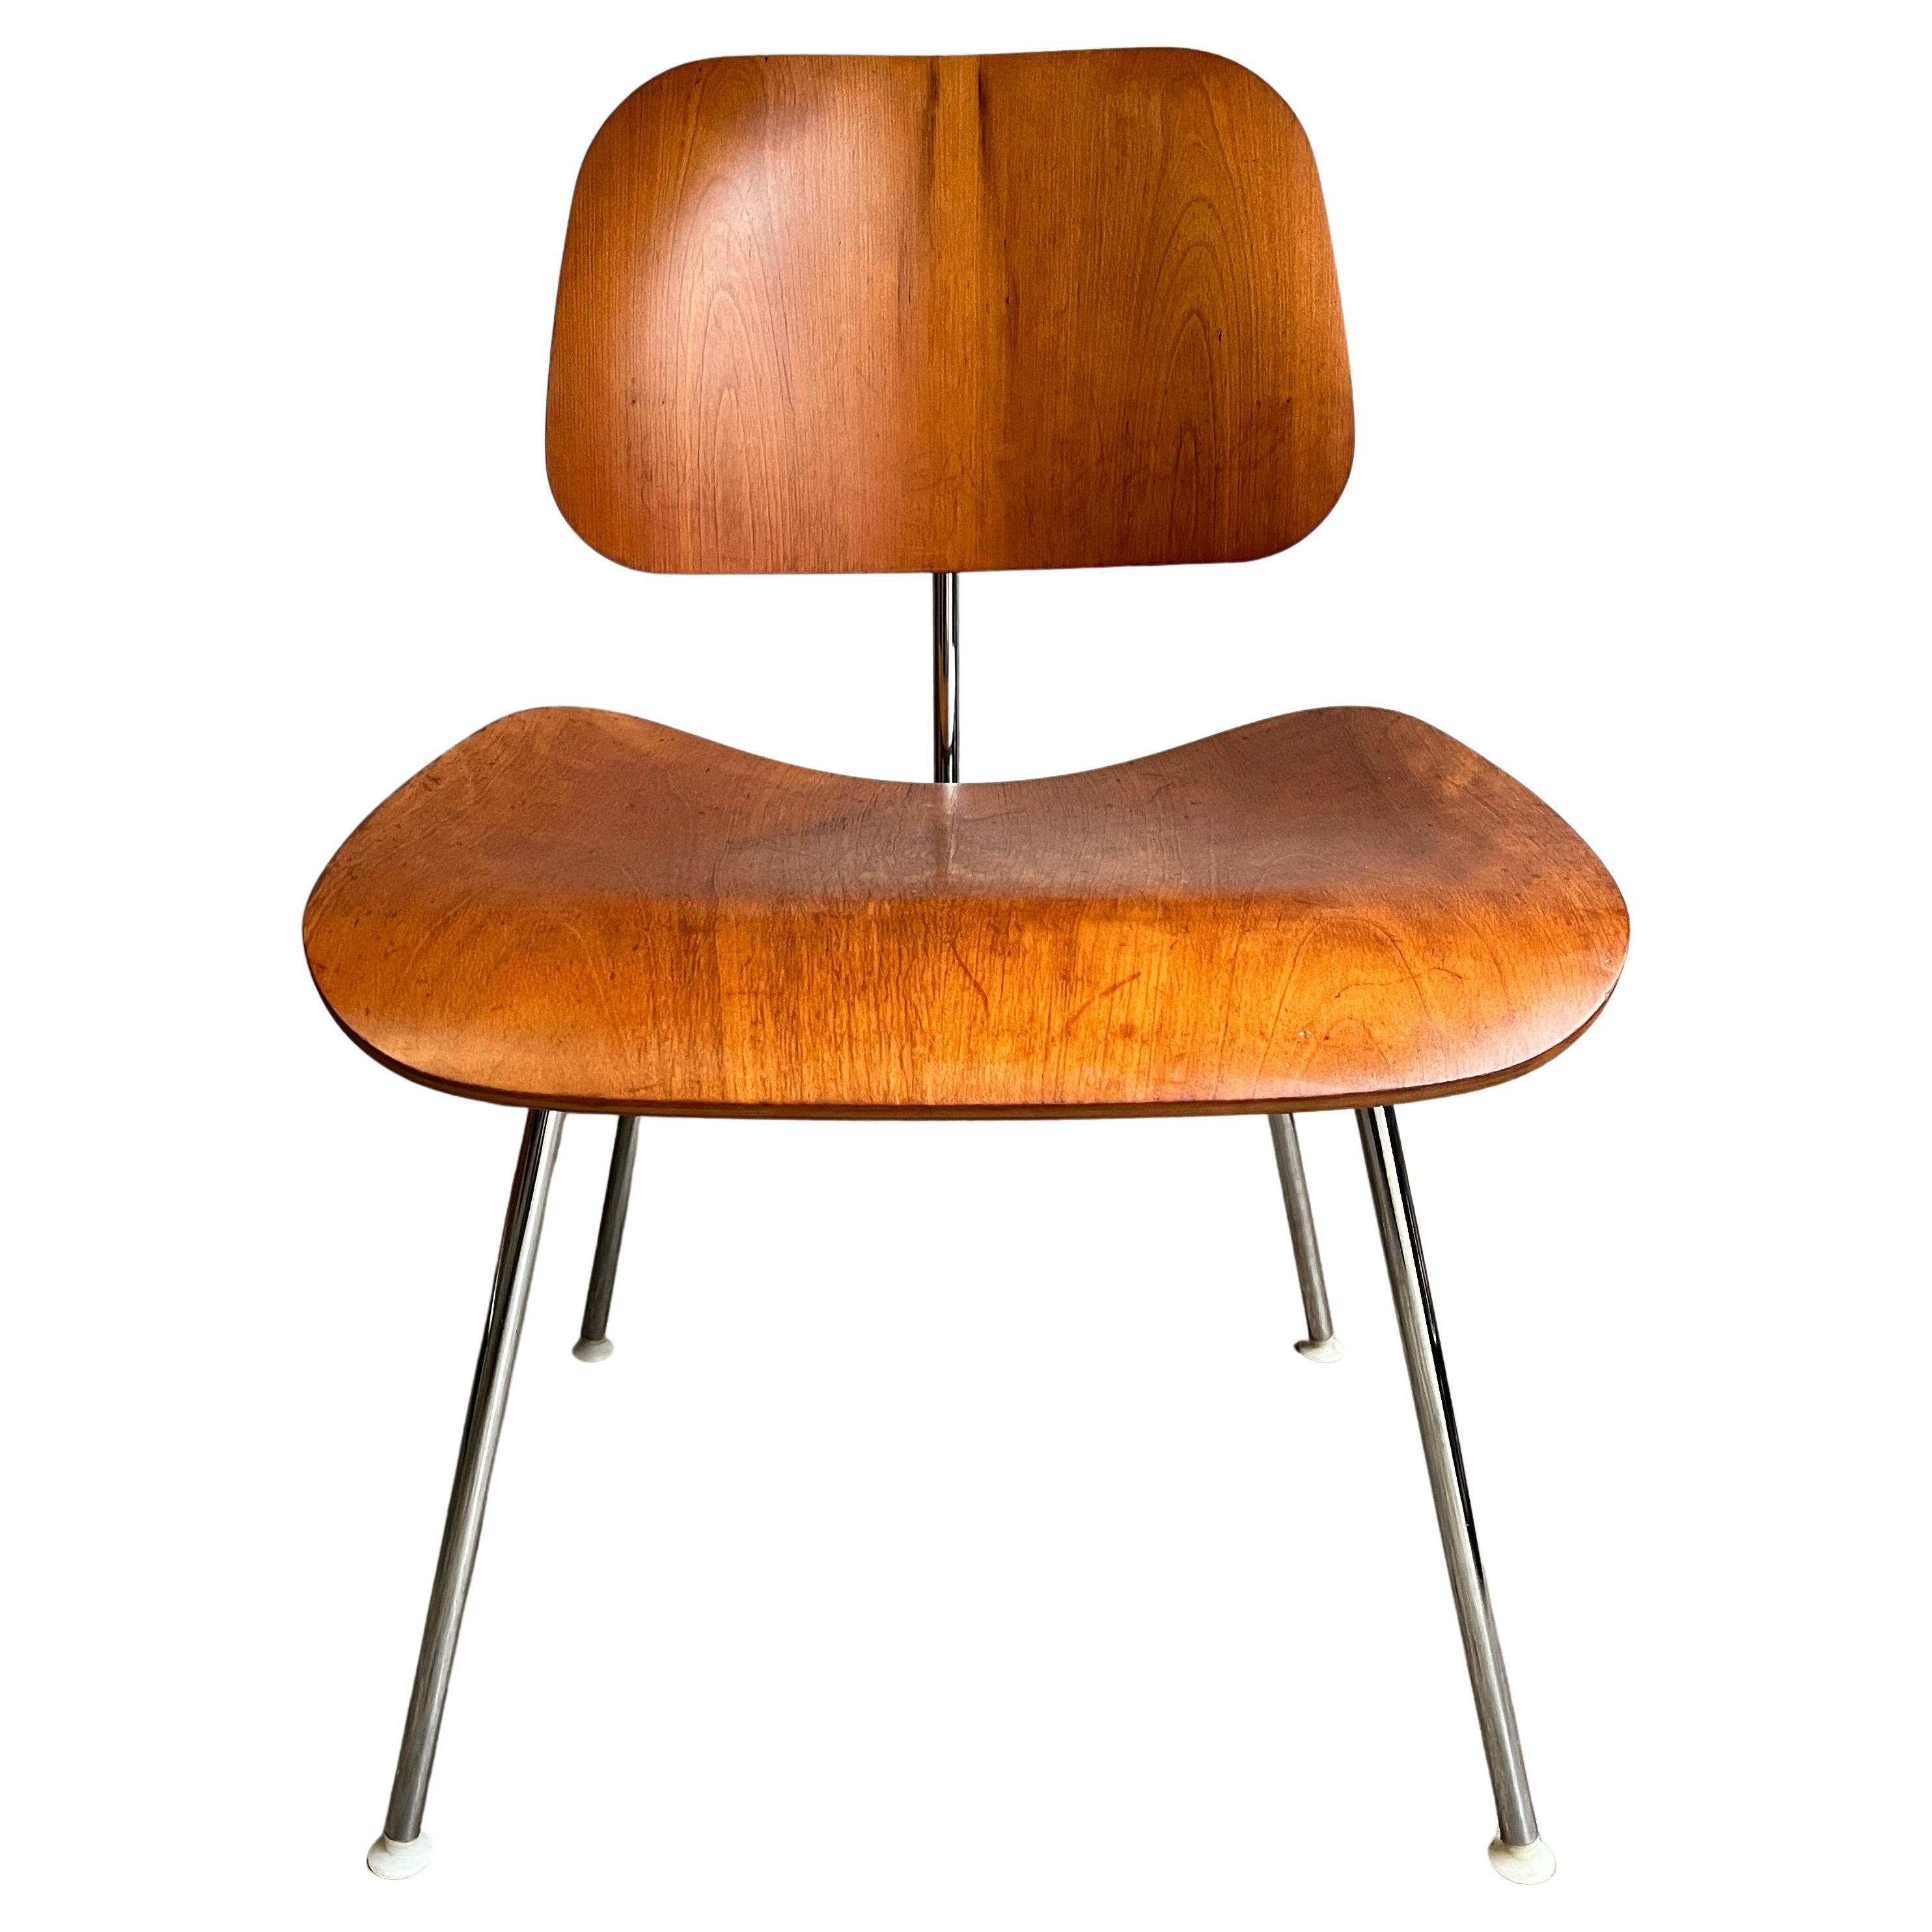 Eames "DCM" Molded Plywood Chairs for Herman Miller in Rare Cherry